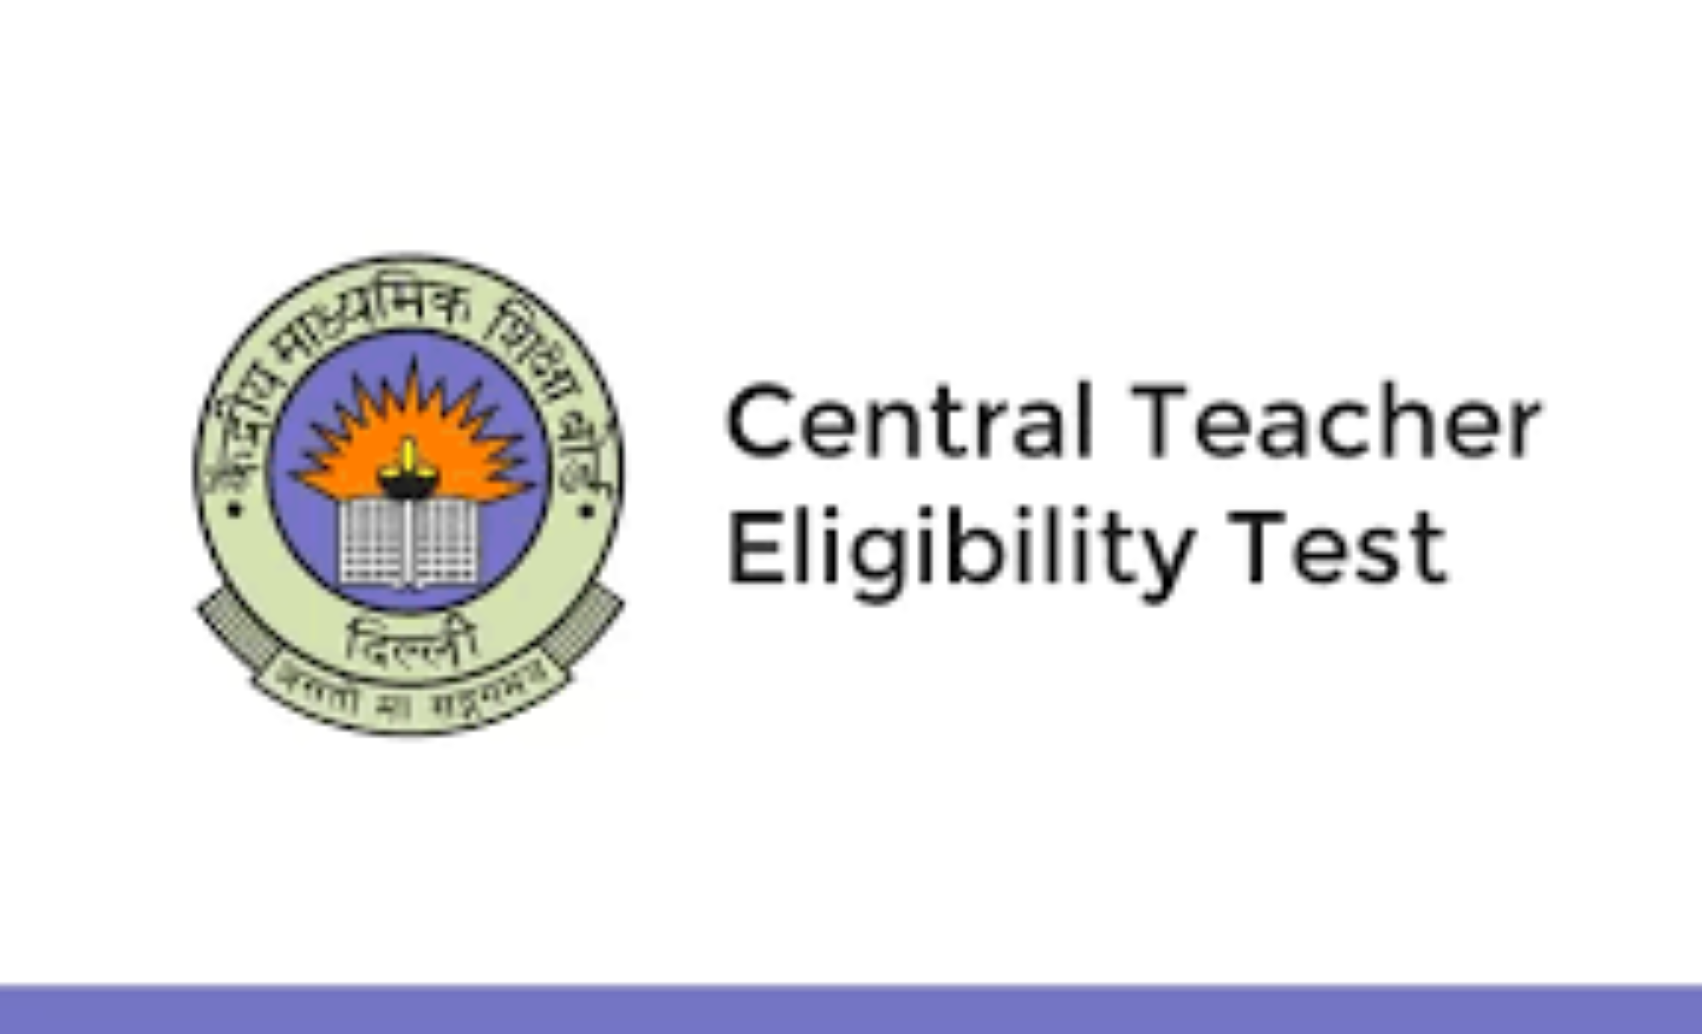 CBSE CTET 2021 Sample papers released, here's how to download them